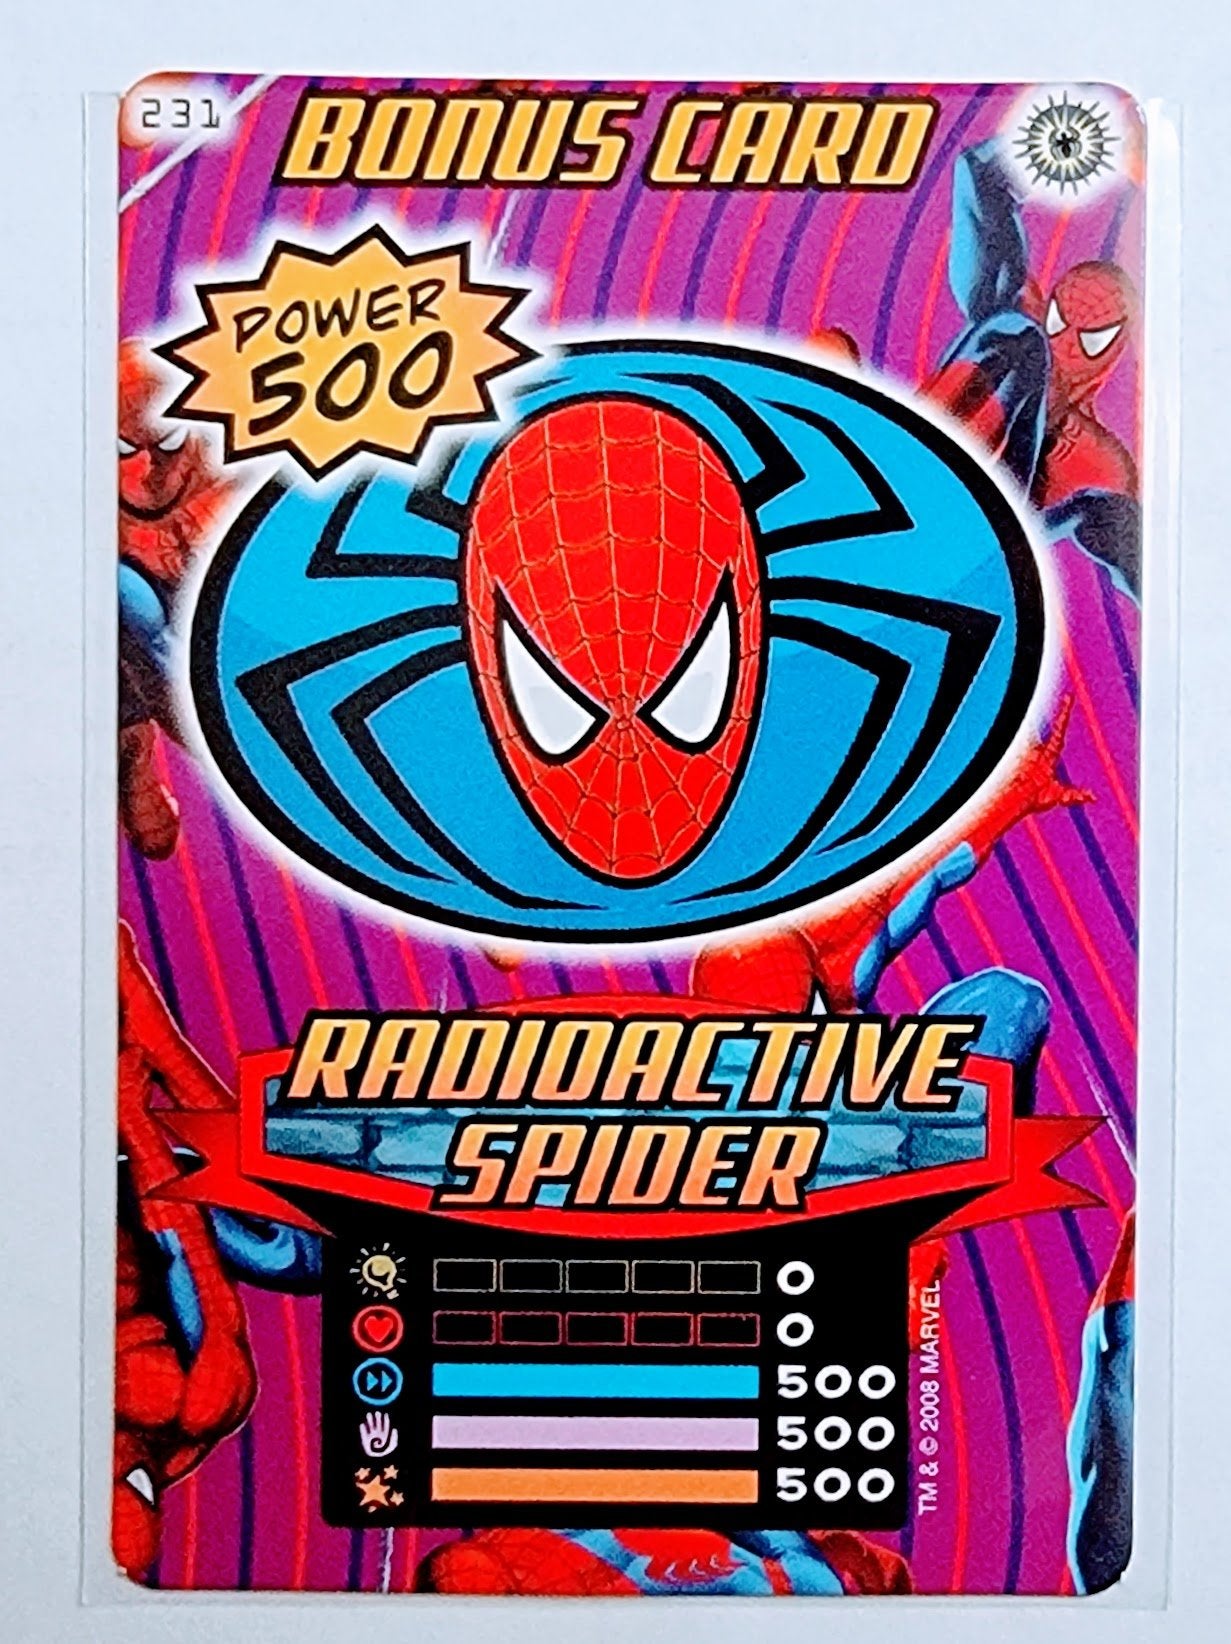 2008 Spiderman Heroes and Villians Radioactive Spider Spiderman Bonus Card #231 Marvel Booster Trading Card UPTI simple Xclusive Collectibles   